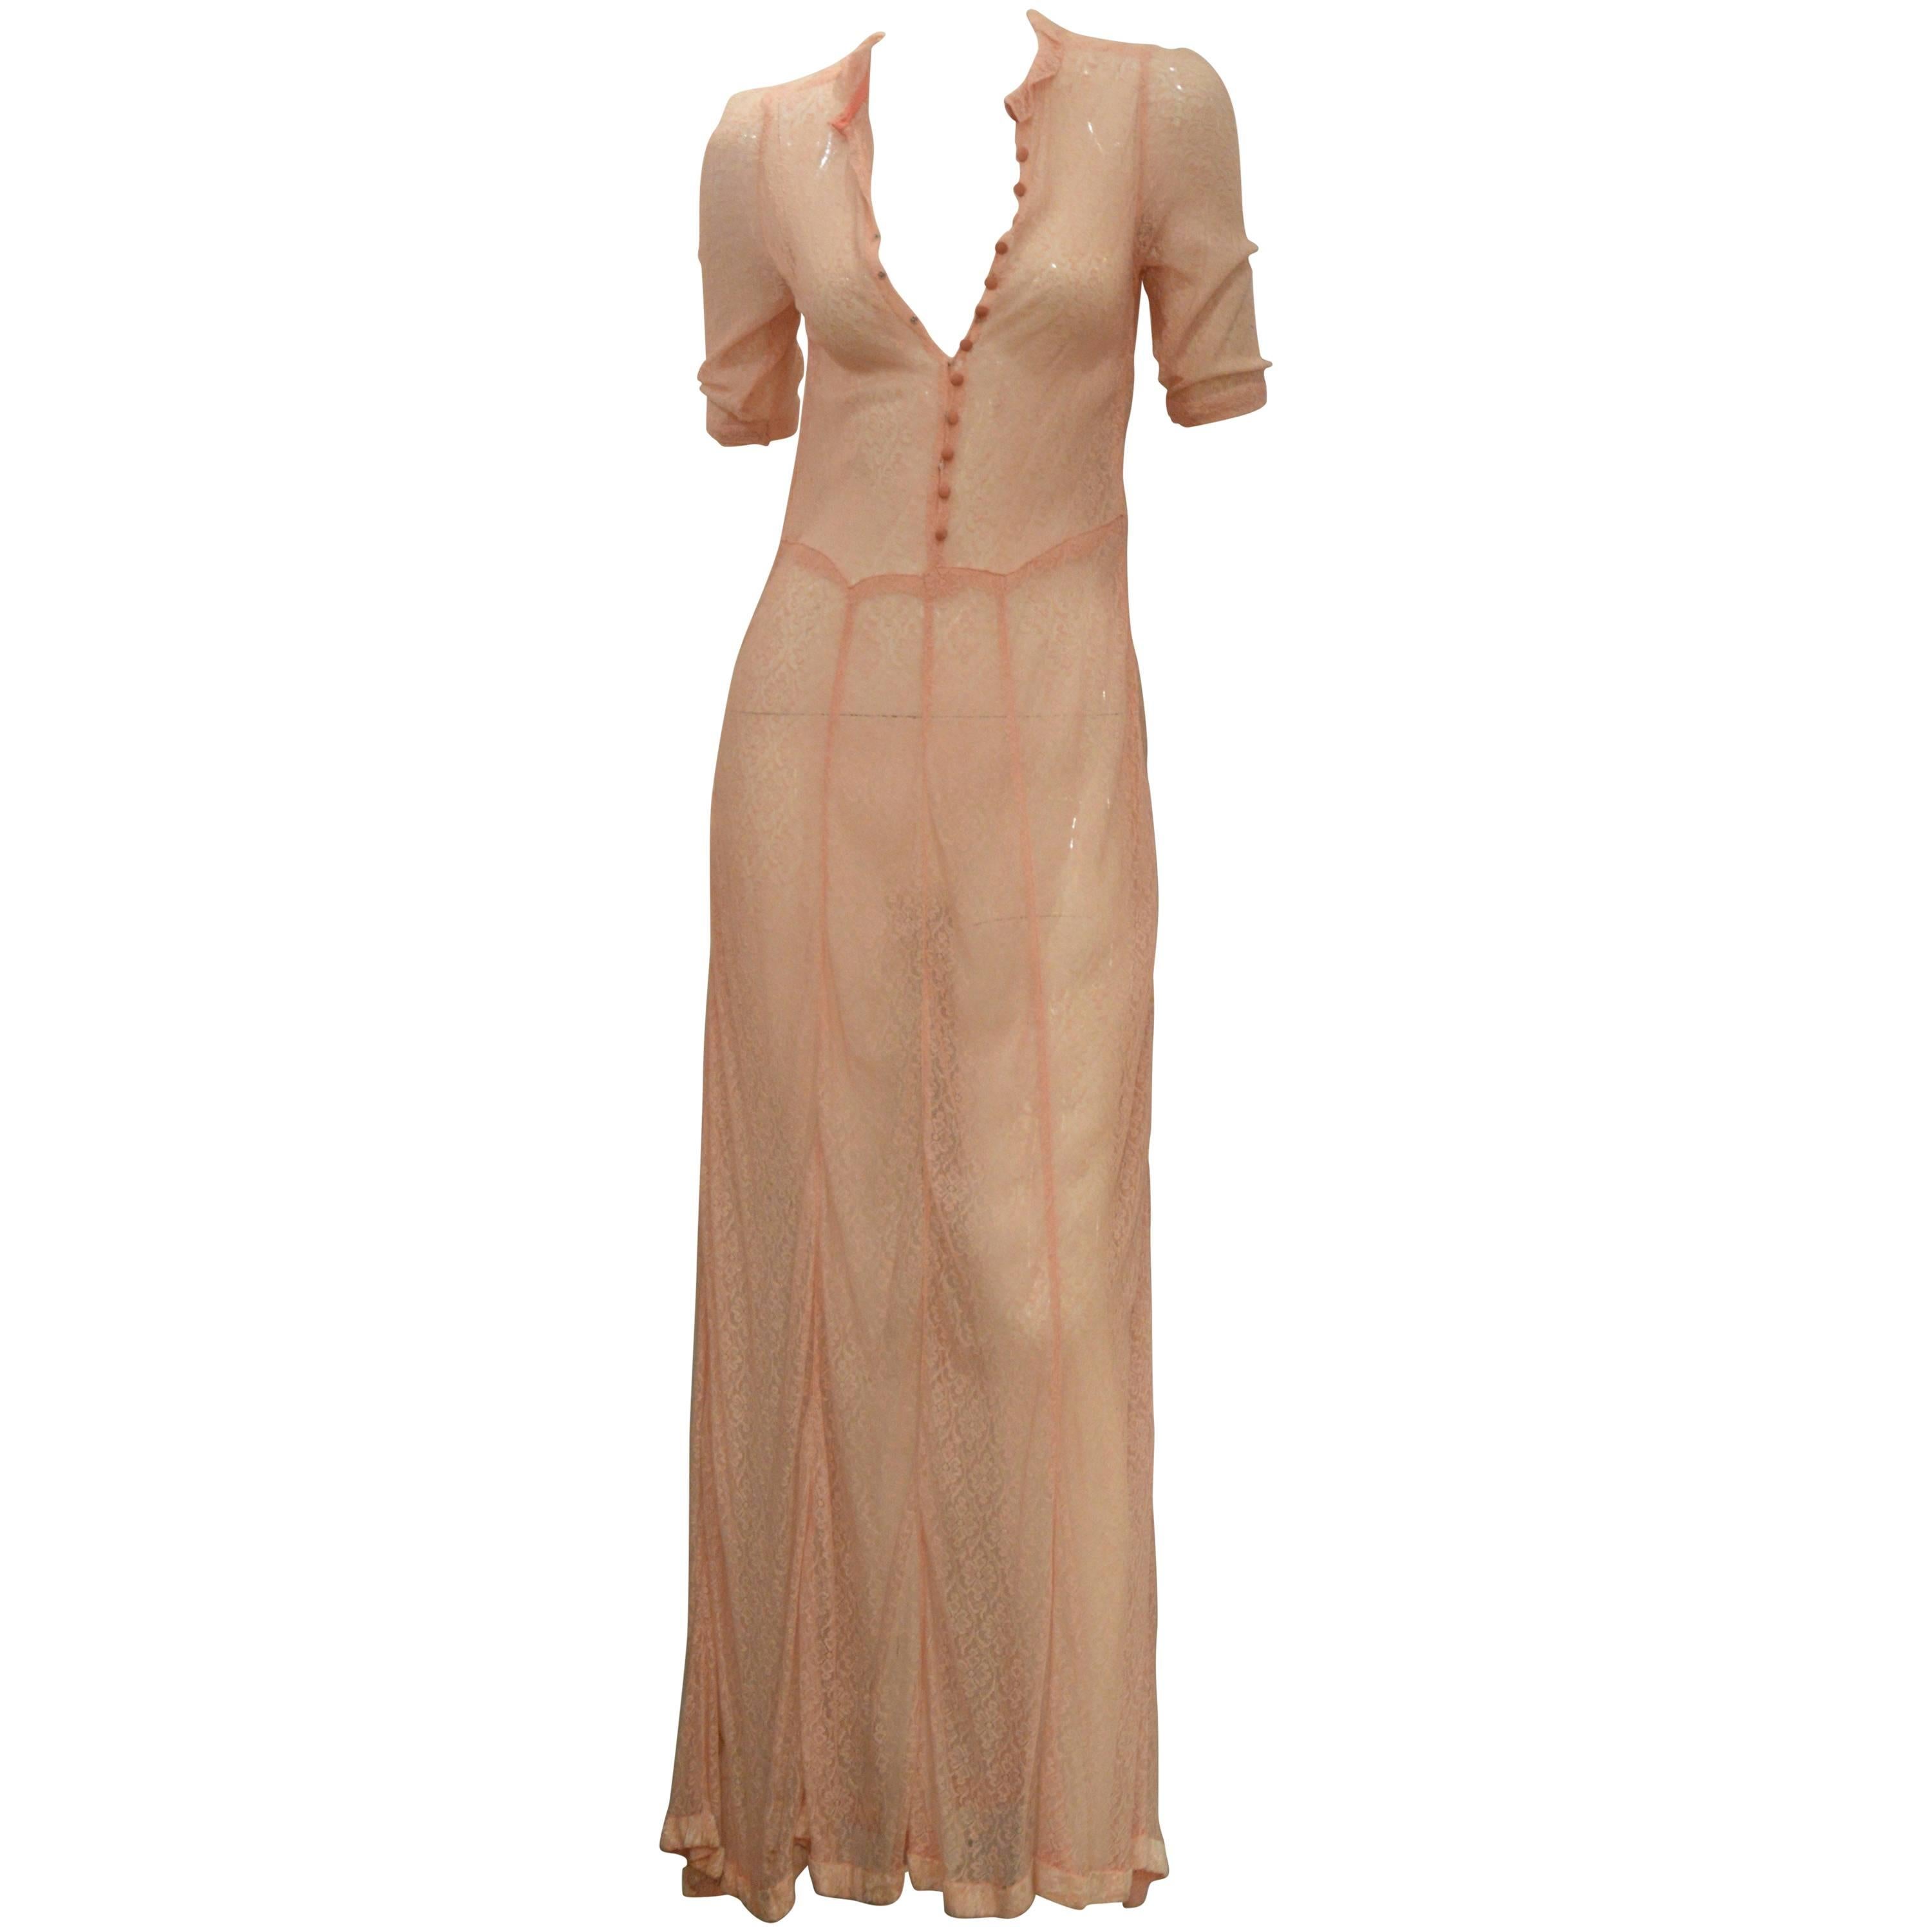 Rare 1920s Delicate Pink Lace Long Blouse Dress For Sale